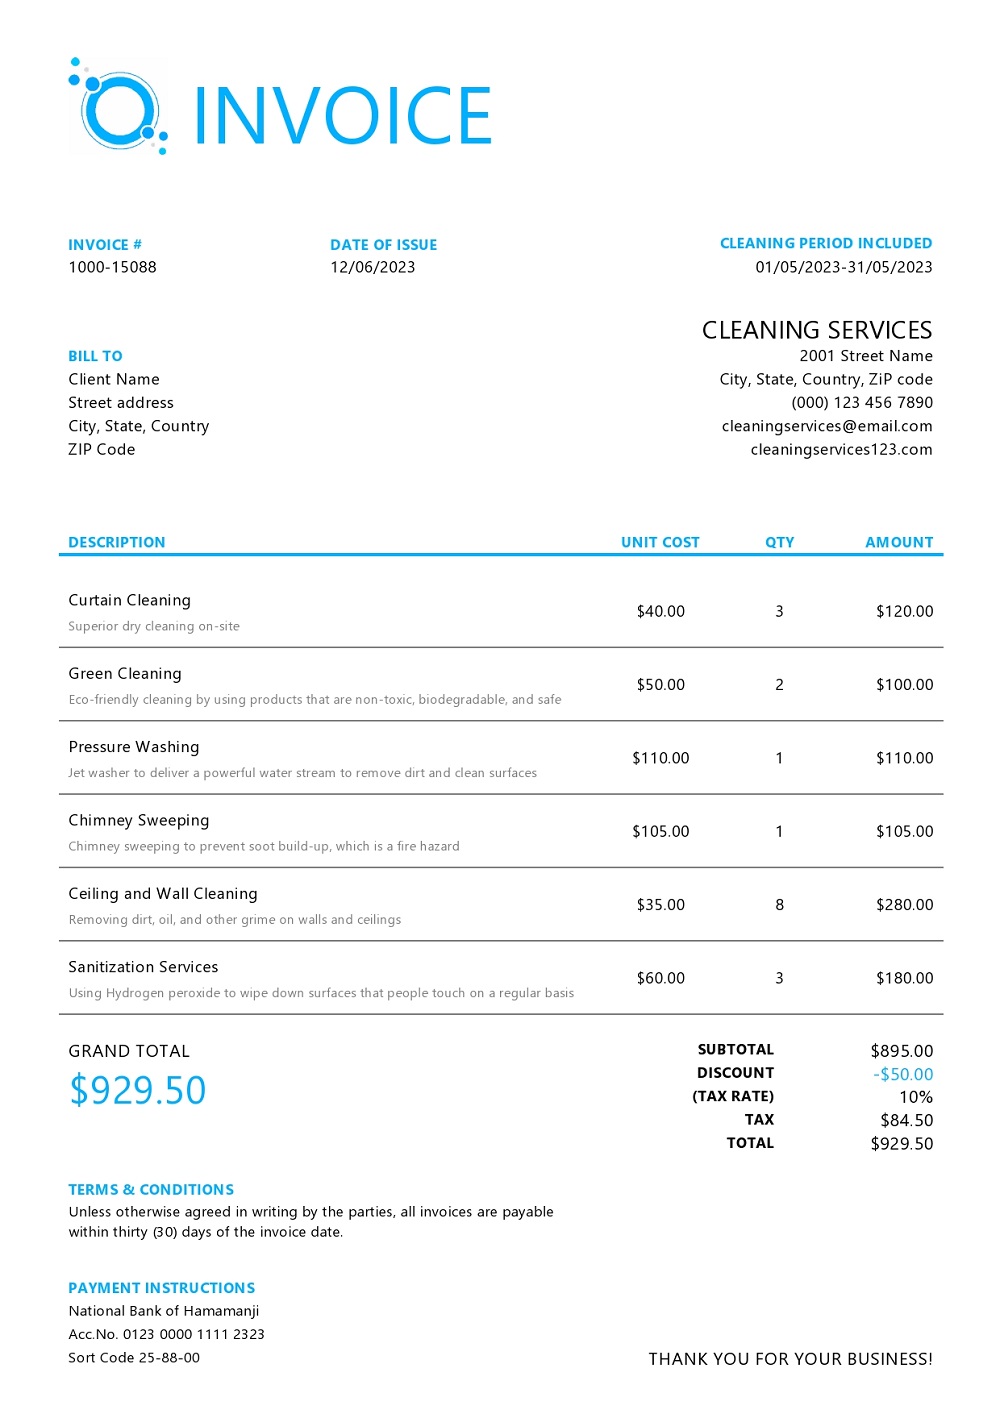 Printable Image of Invoice Template